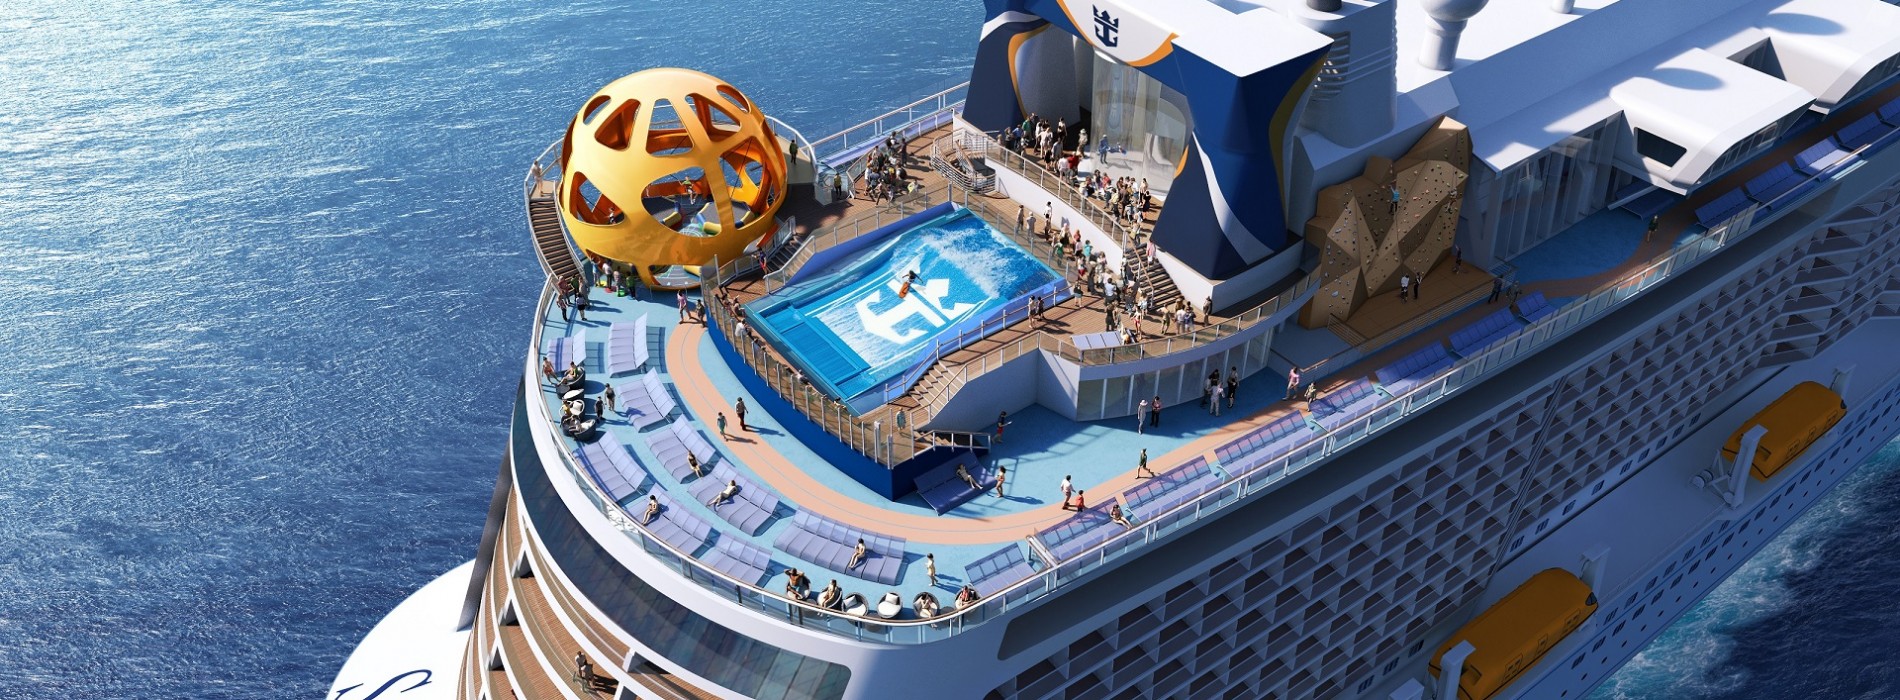 TIRUN announces the arrival of Spectrum of the Seas in the Asia region in 2019